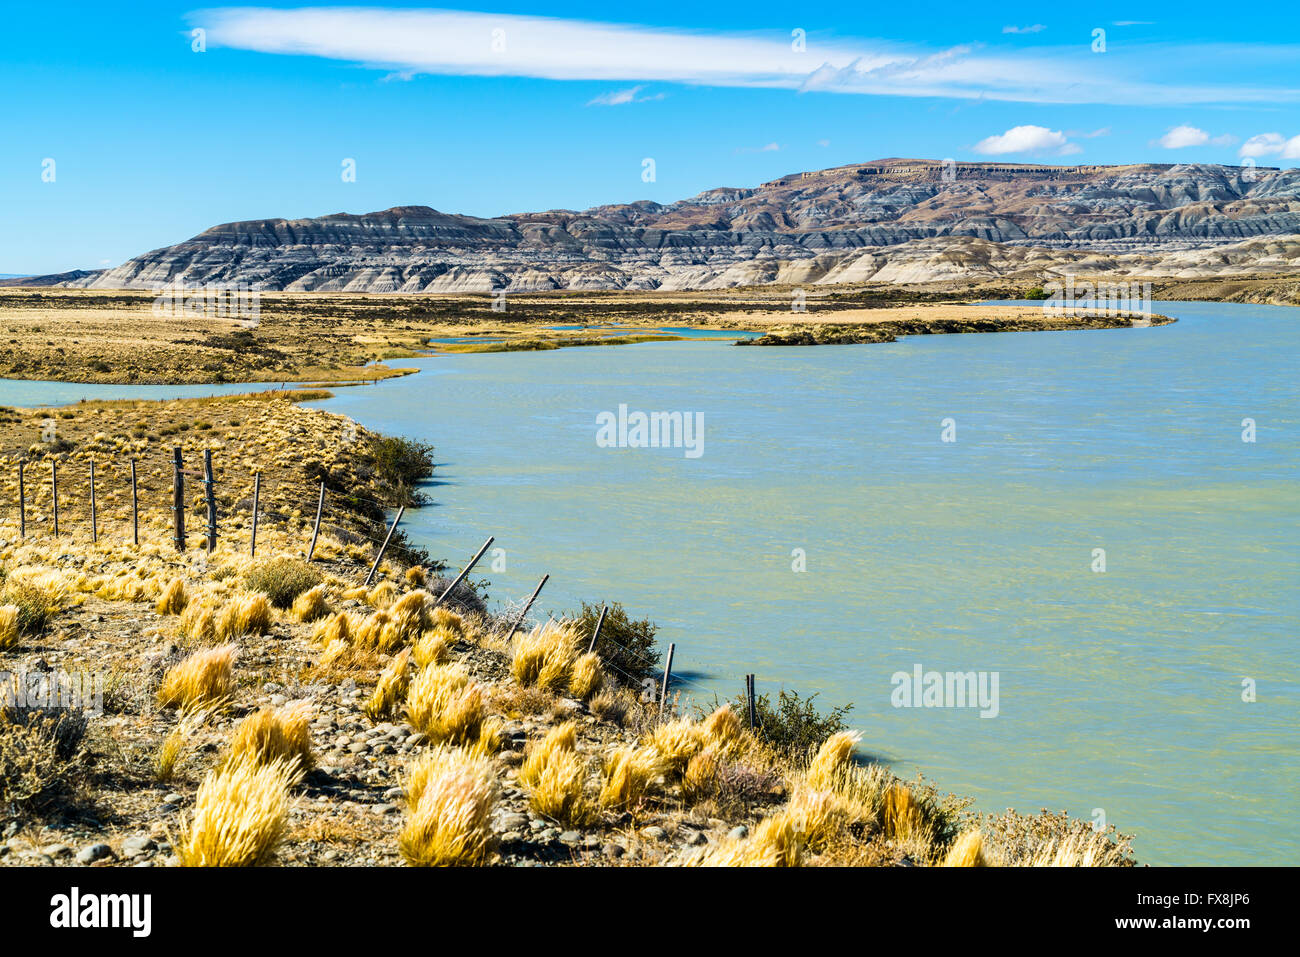 Beautiful view of mountain and lake at El Chalten, Argentina Stock Photo